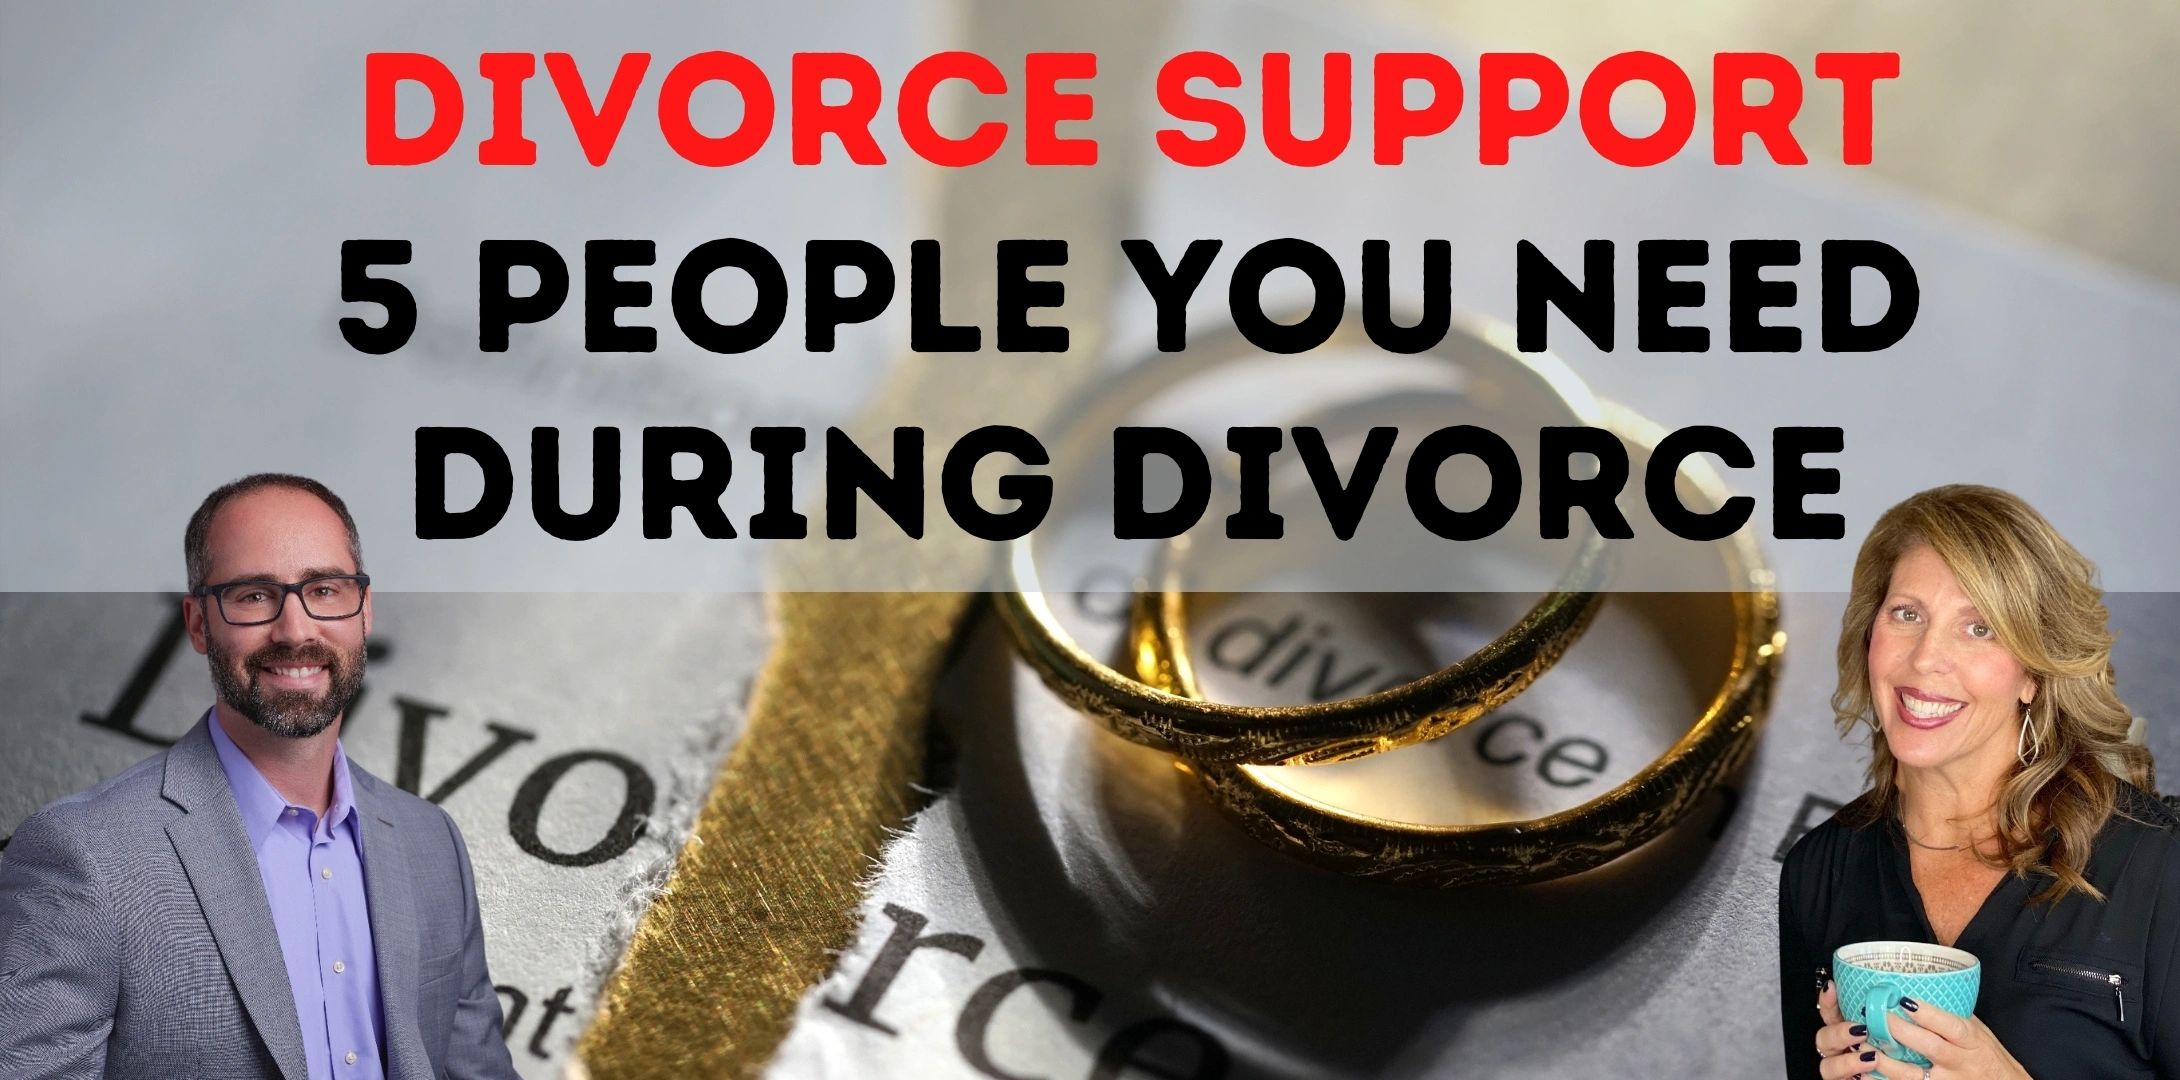 5 People You Need During Divorce